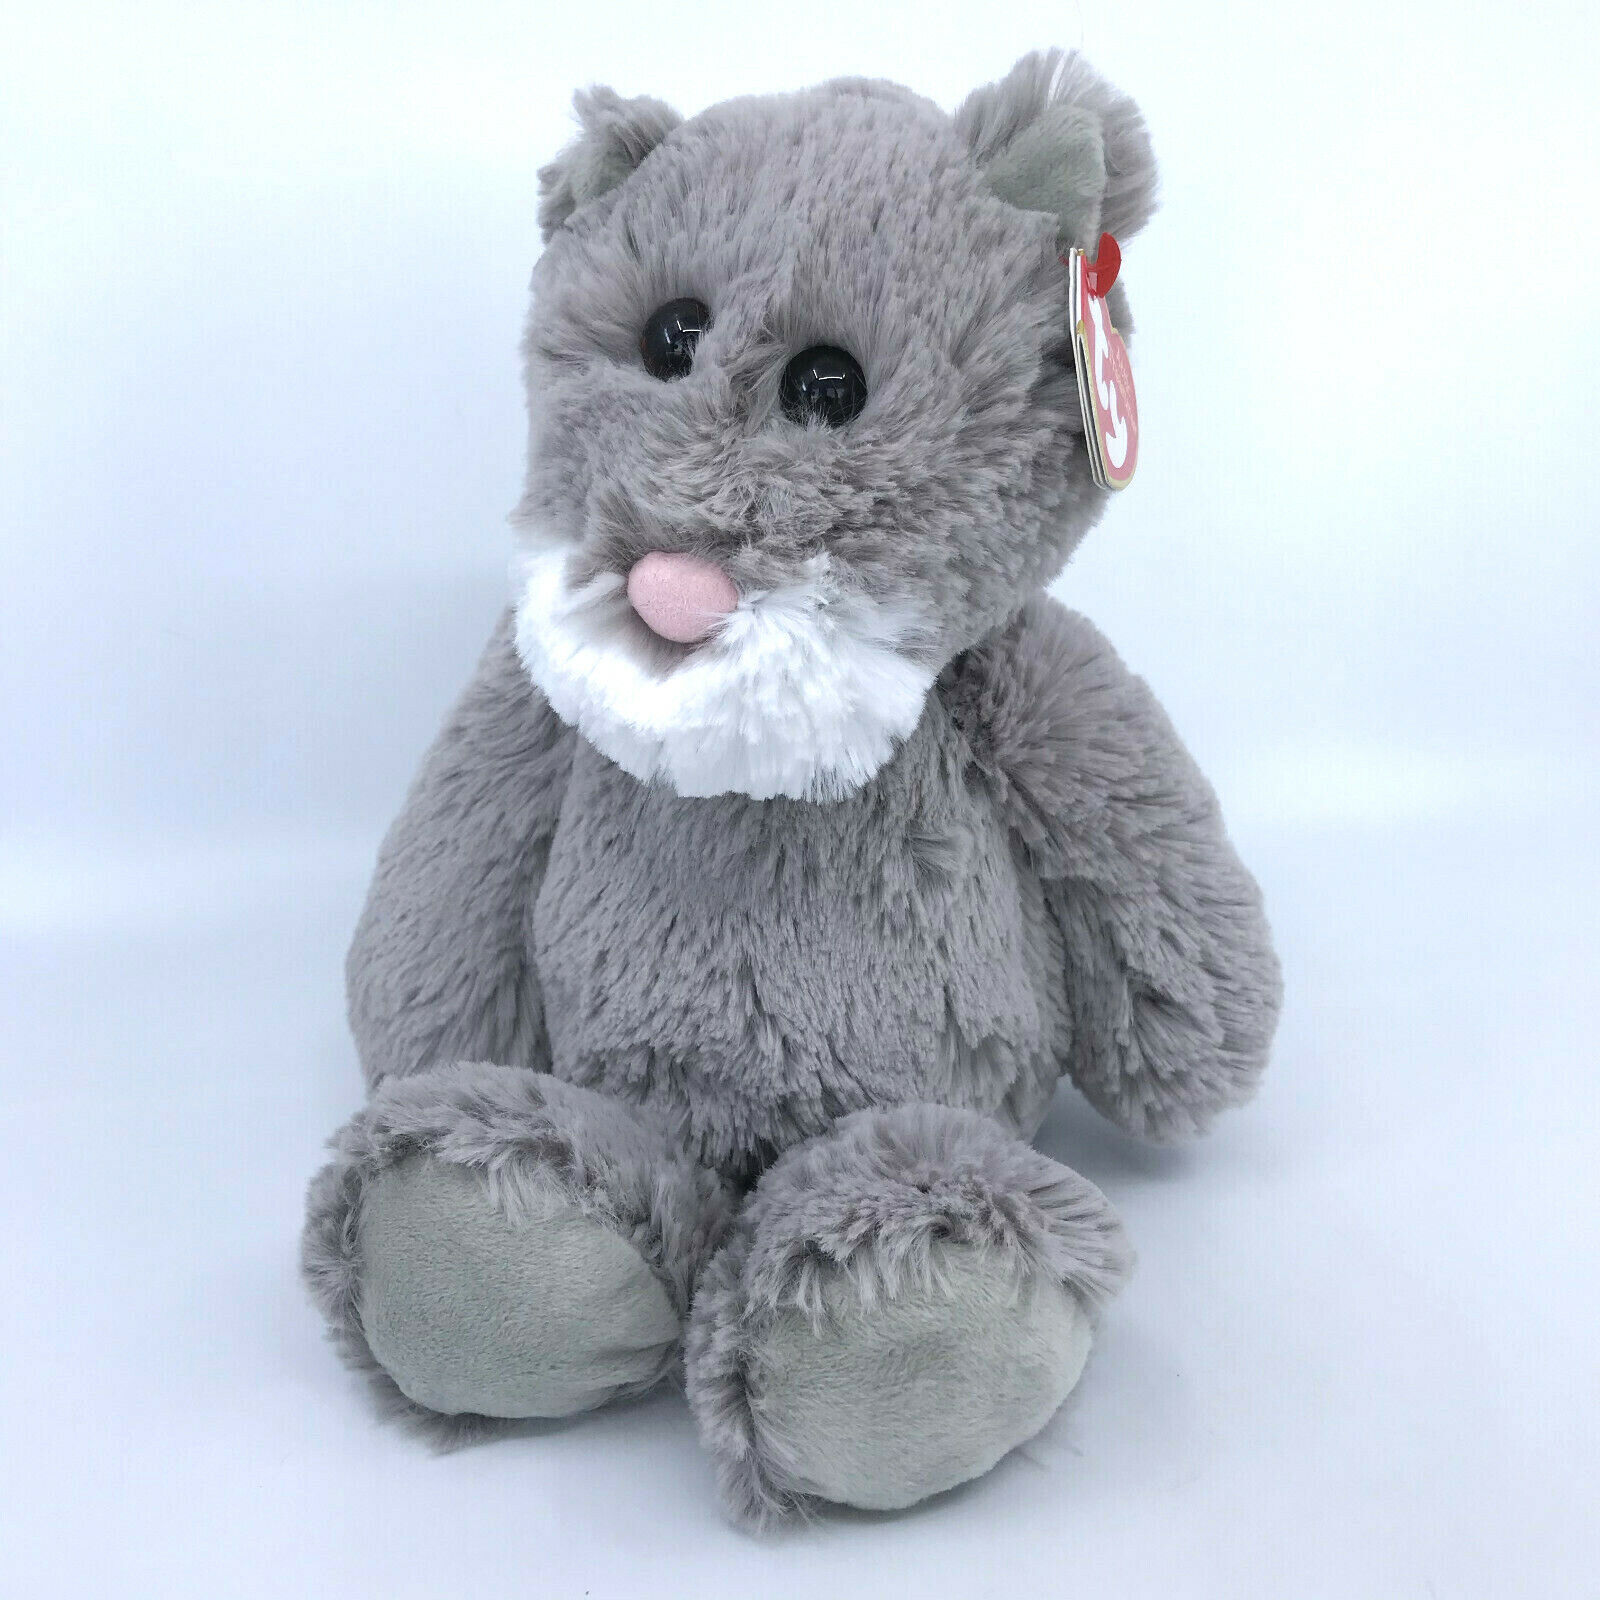 Ty Beanie Baby Attic Treasure Squeaky Gray Mouse Style 6017 Plush 8 Inch for sale online